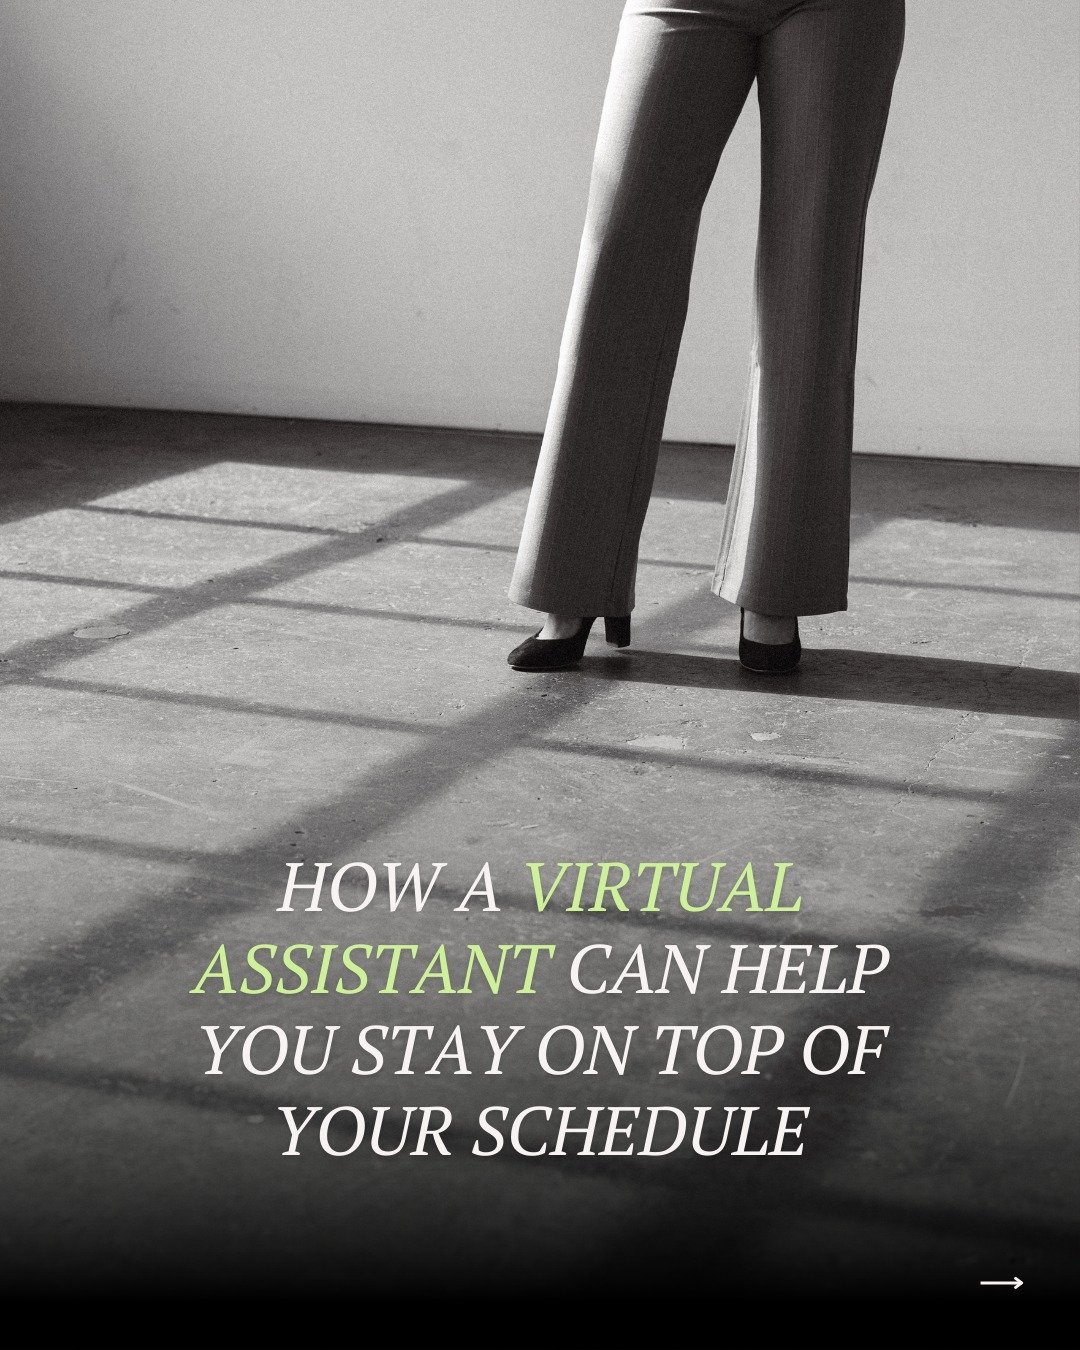 When it comes to maximizing productivity and keeping your life in order, effective calendar management is a game changer 🗓✨

If you feel overwhelmed when you pull up your calendar, it might be time to hire a Virtual Assistant to help you avoid sched